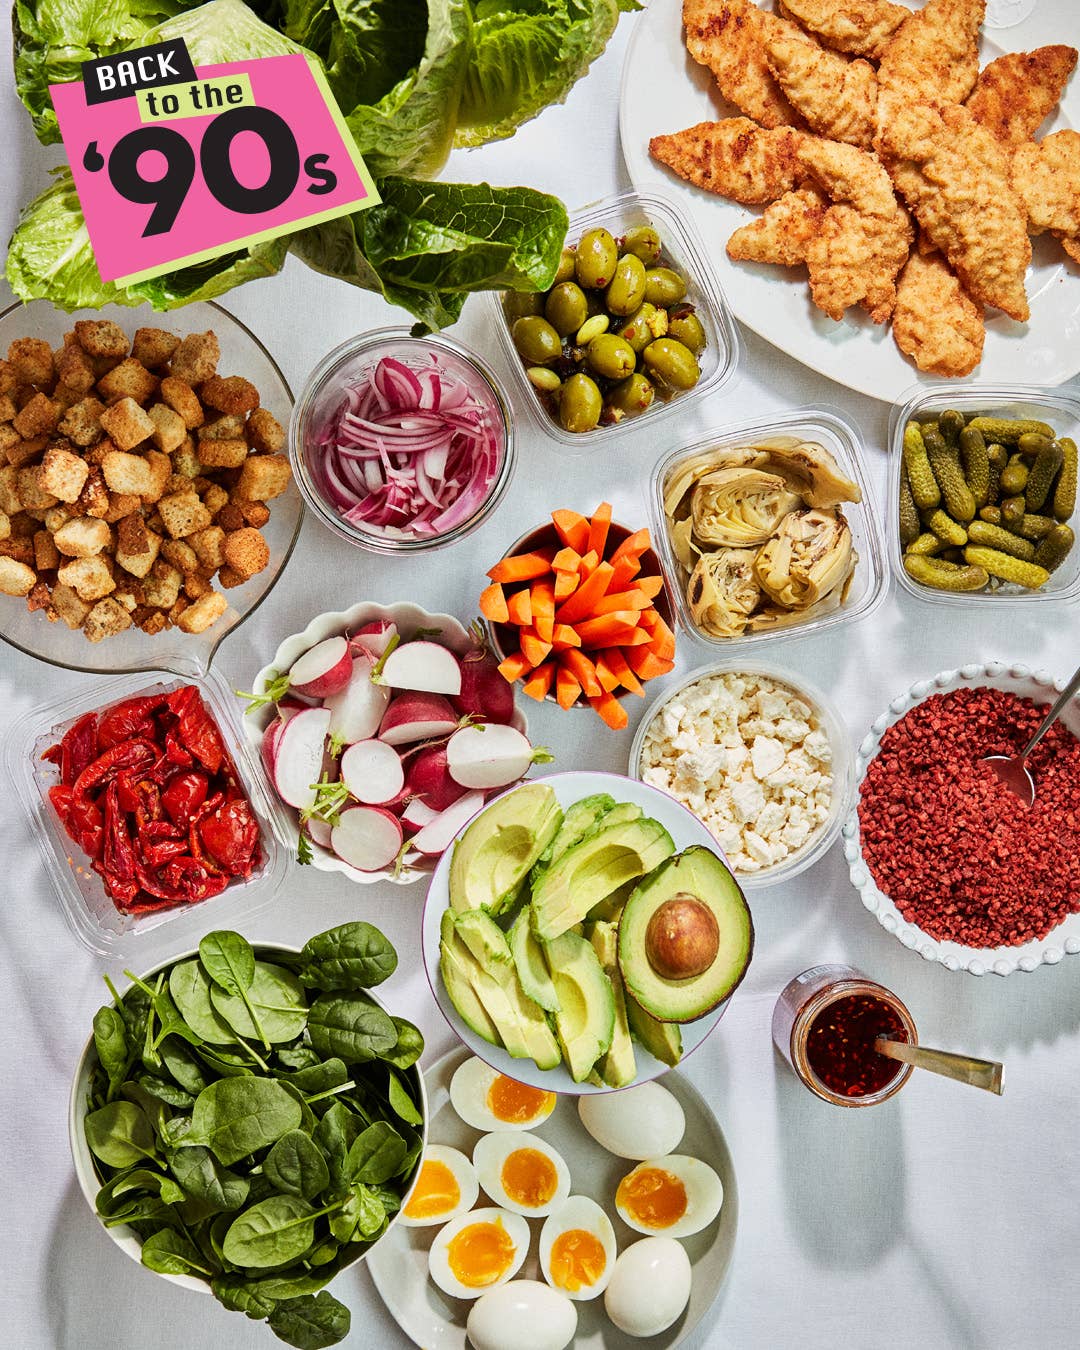 How to Throw an Over-the-Top ‘90s Salad Bar Party